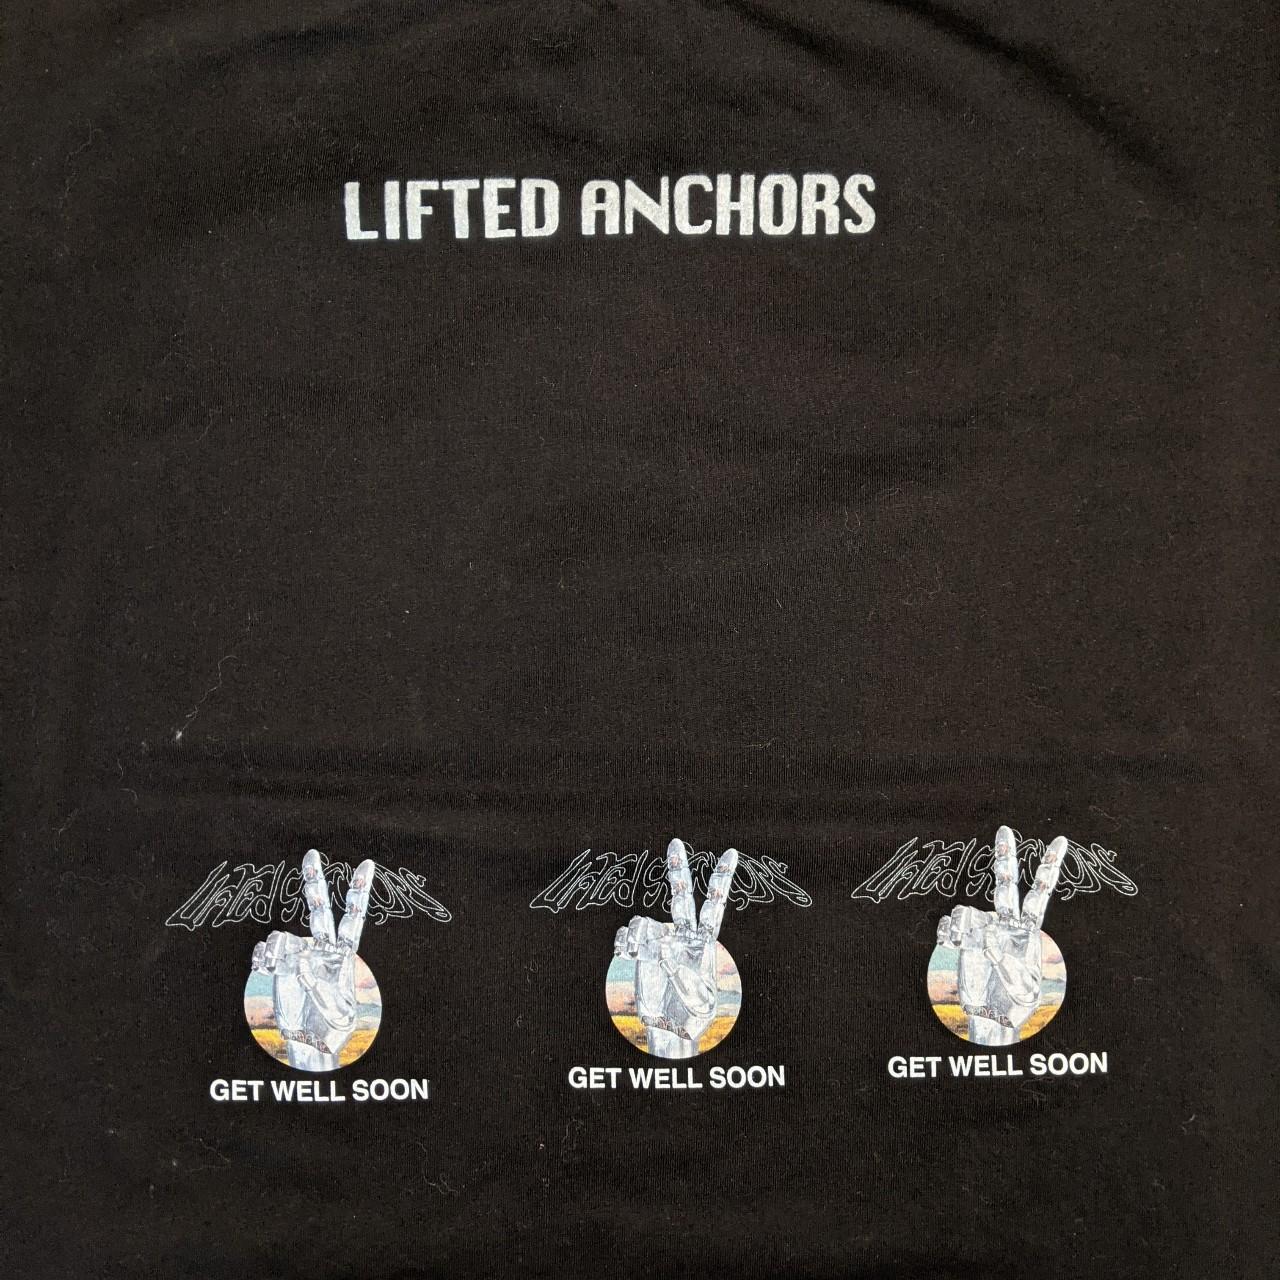 Lifted Anchors Men's Black and Blue T-shirt (2)